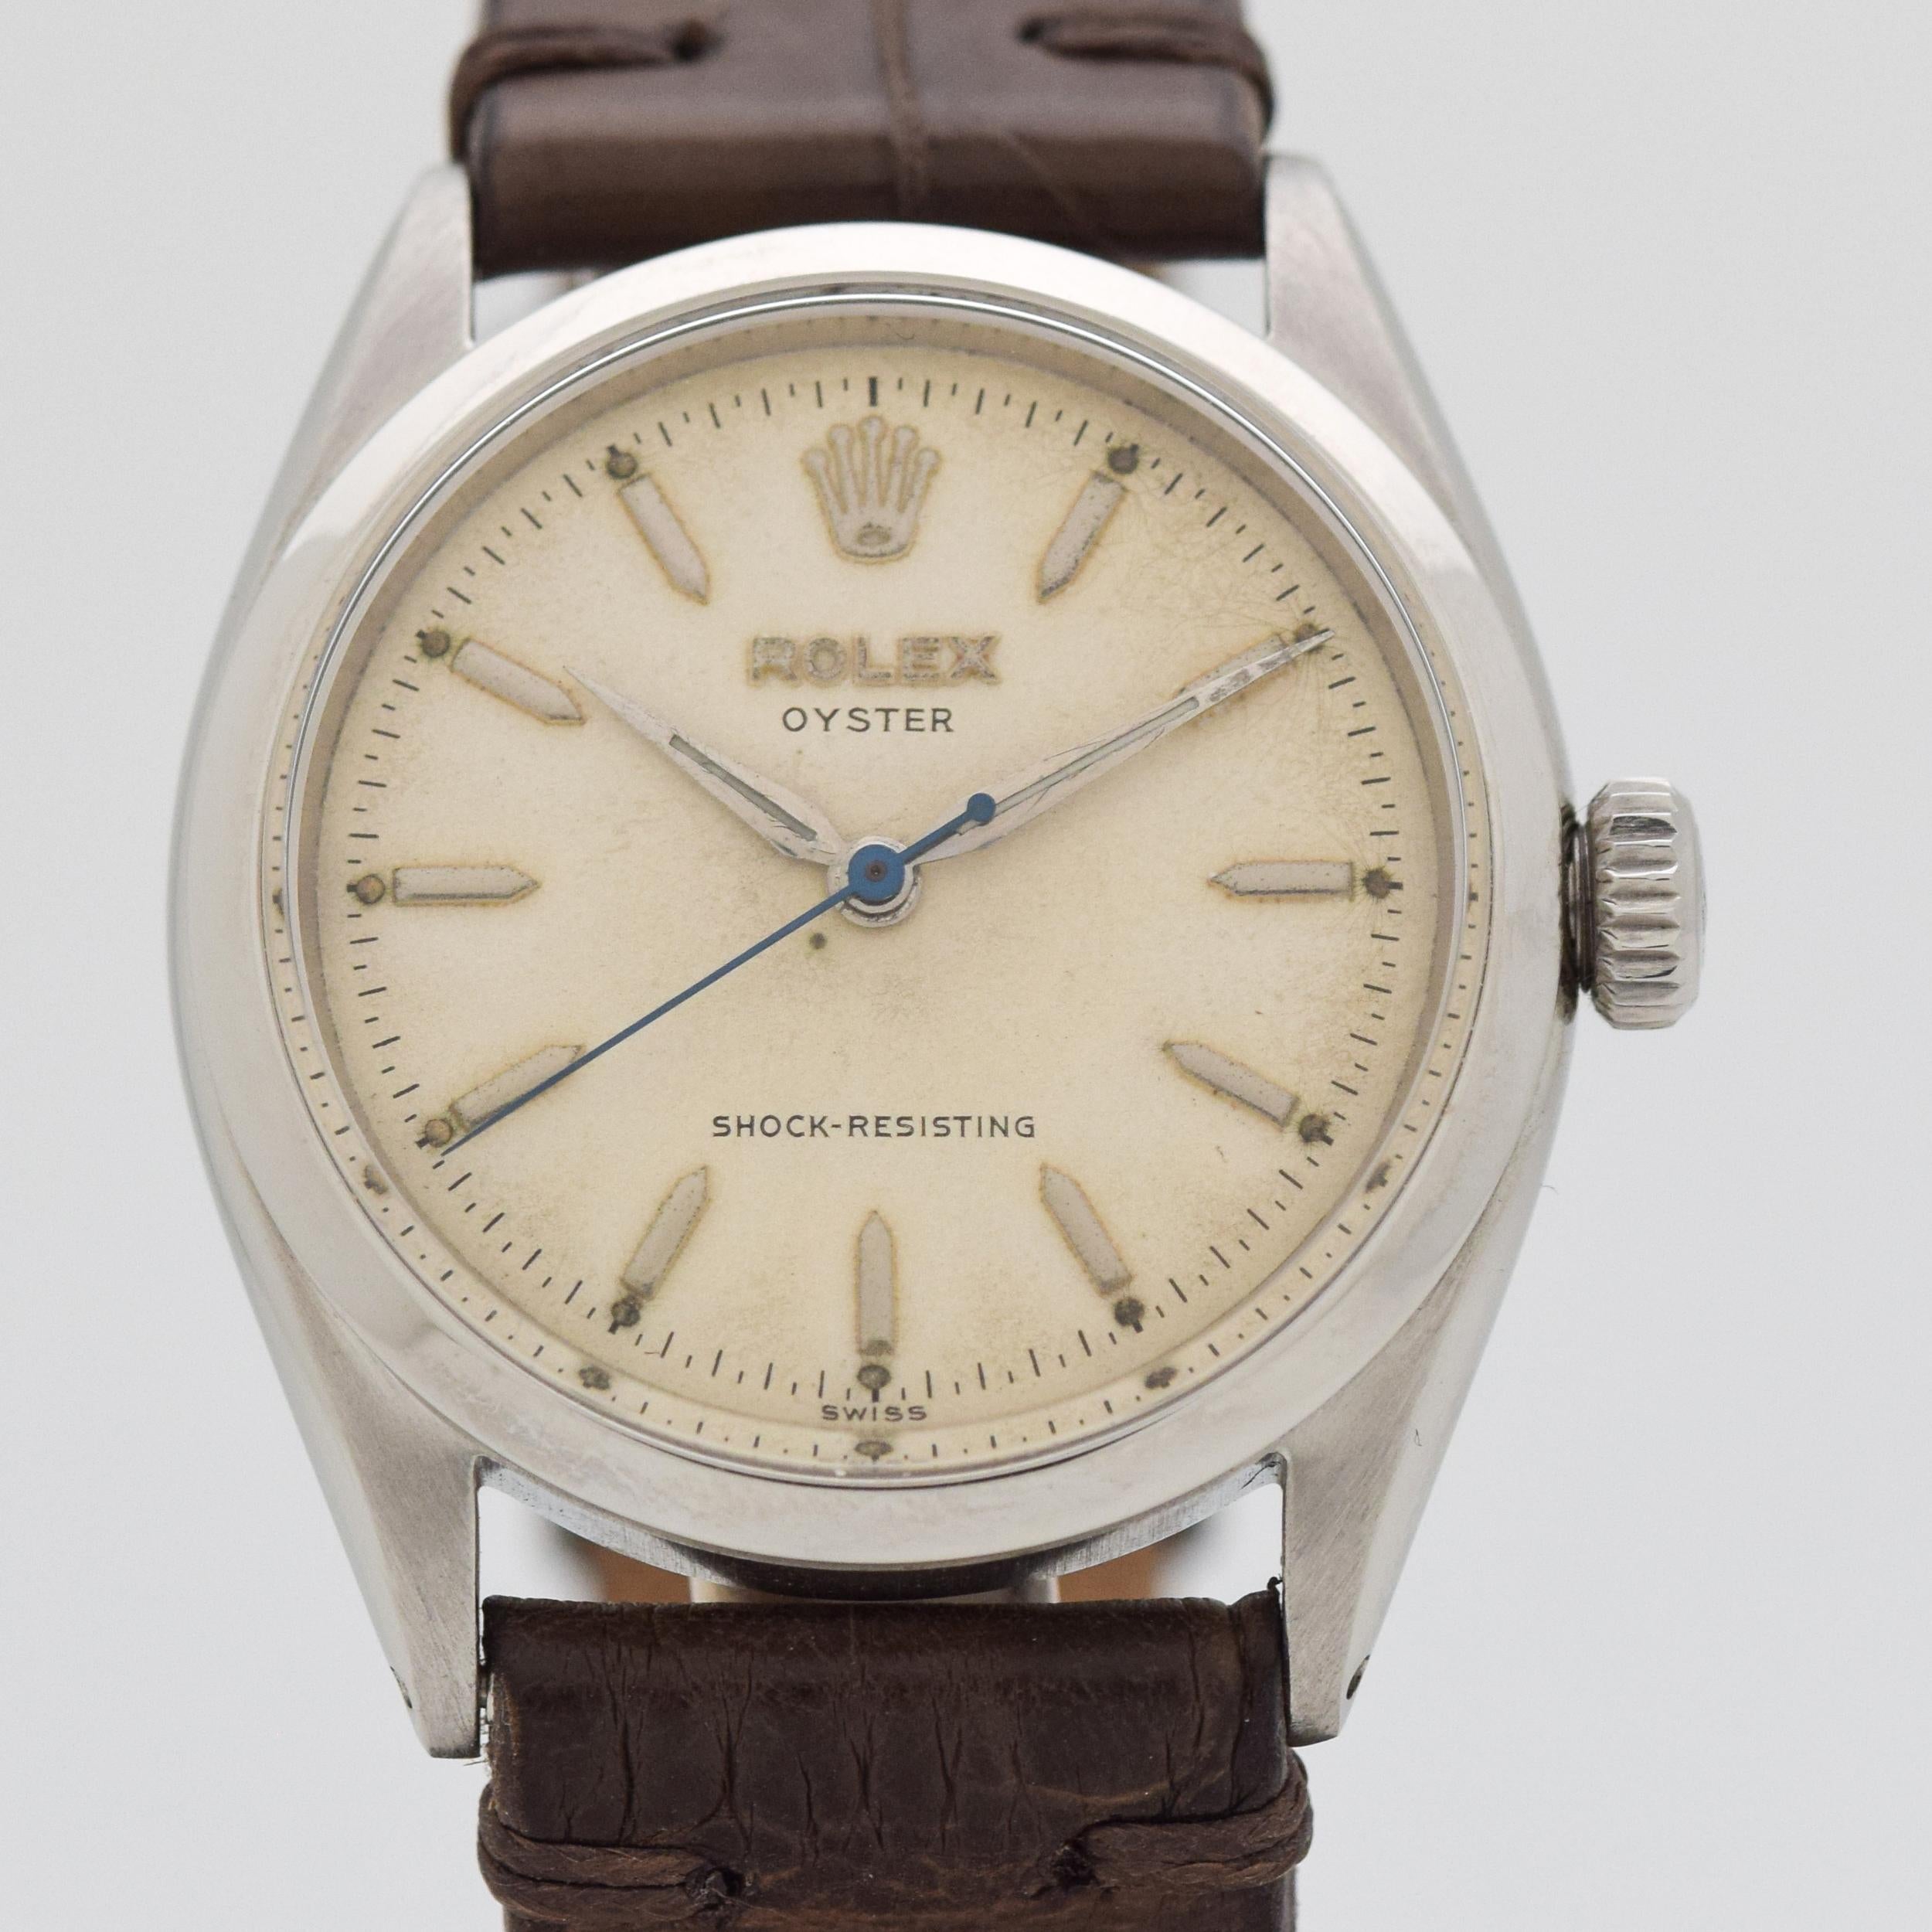 1955 Vintage Rolex Oyster Ref. 6480 Stainless Steel watch with Original Silver Dial with Applied Pointed Bar/Baton Markers. 34mm x 38mm lug to lug (1.34 in. x 1.5 in.) 17 jewel, manual caliber 1210 movement. Triple Signed.